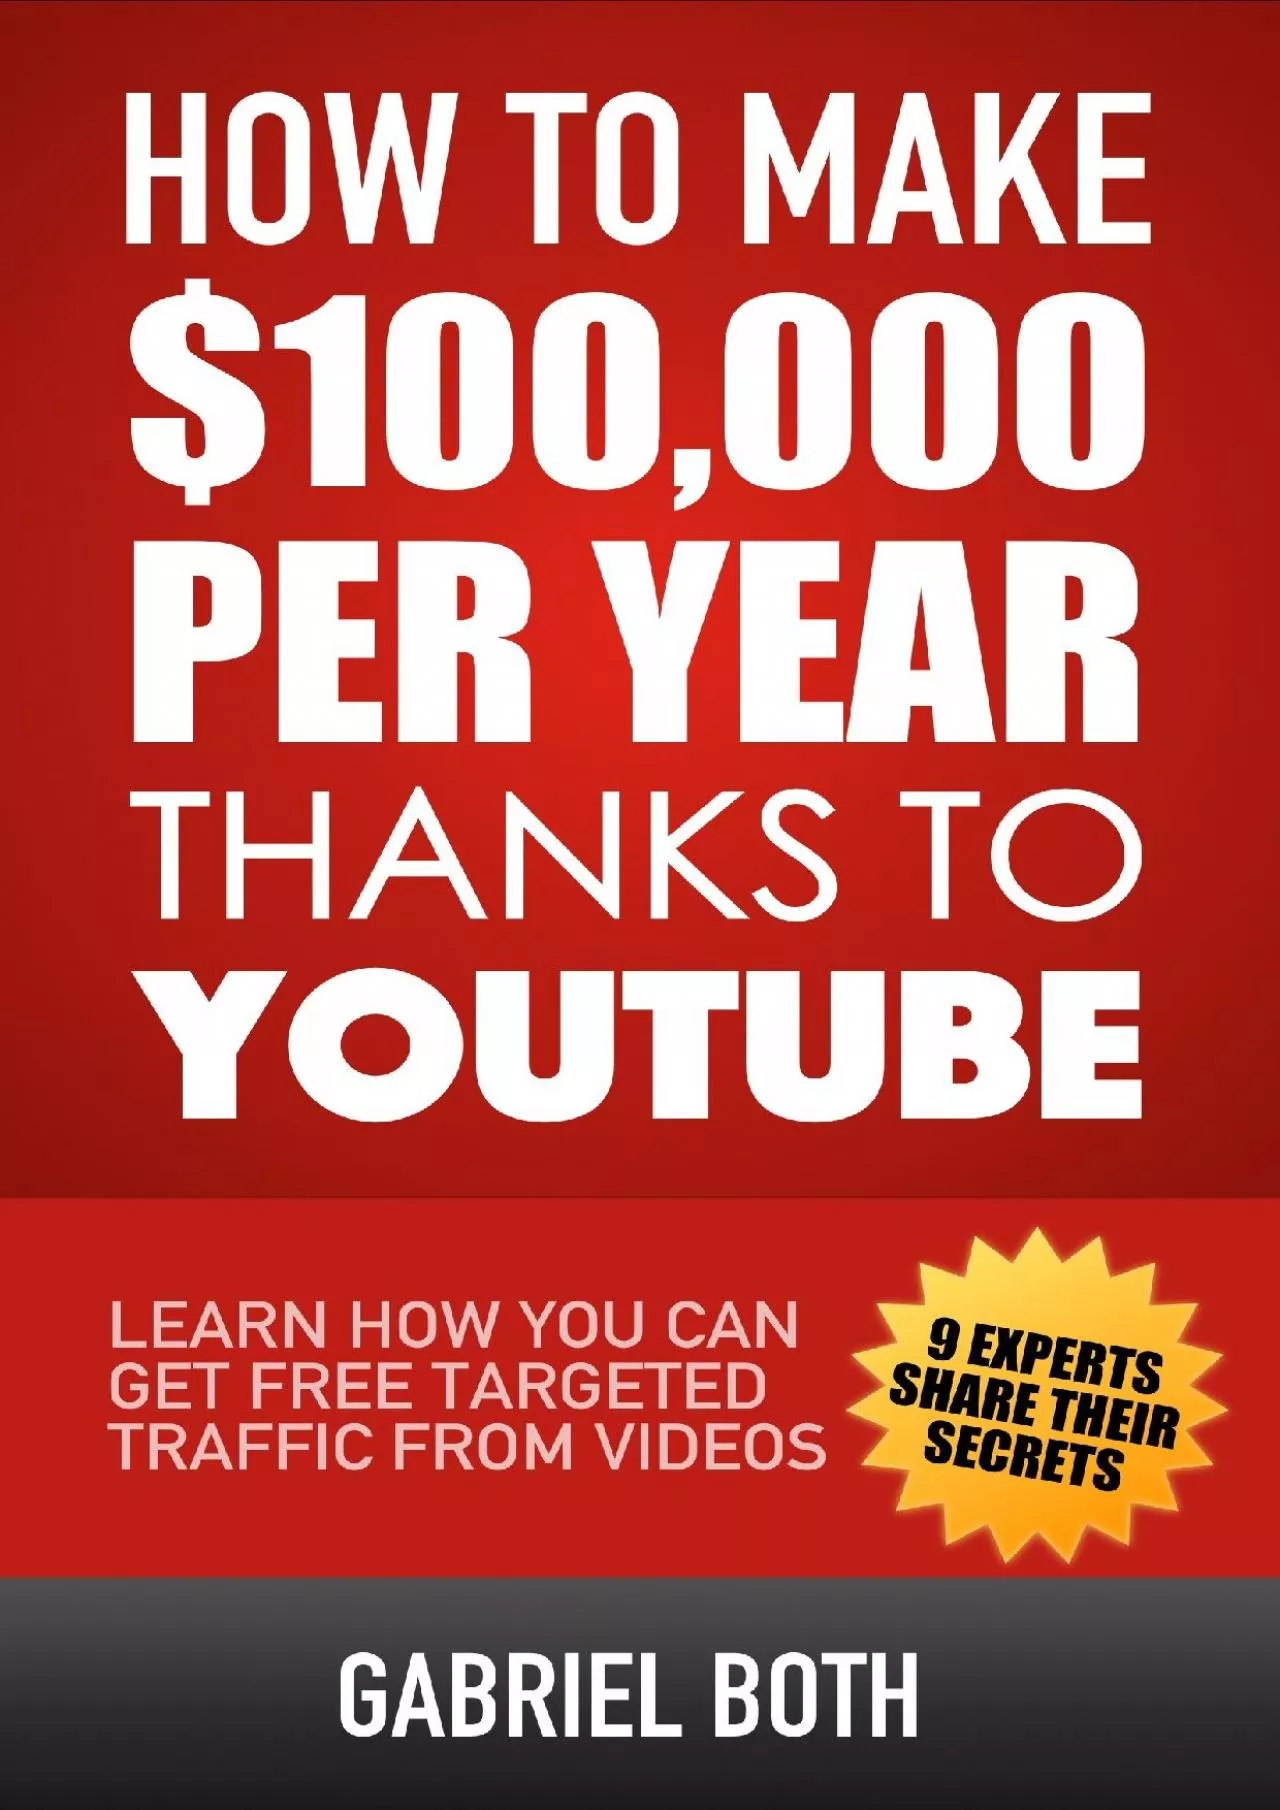 How To Make $100,000 Per Year Thanks To YouTube: Learn How You Can Get Free Targeted Traffic